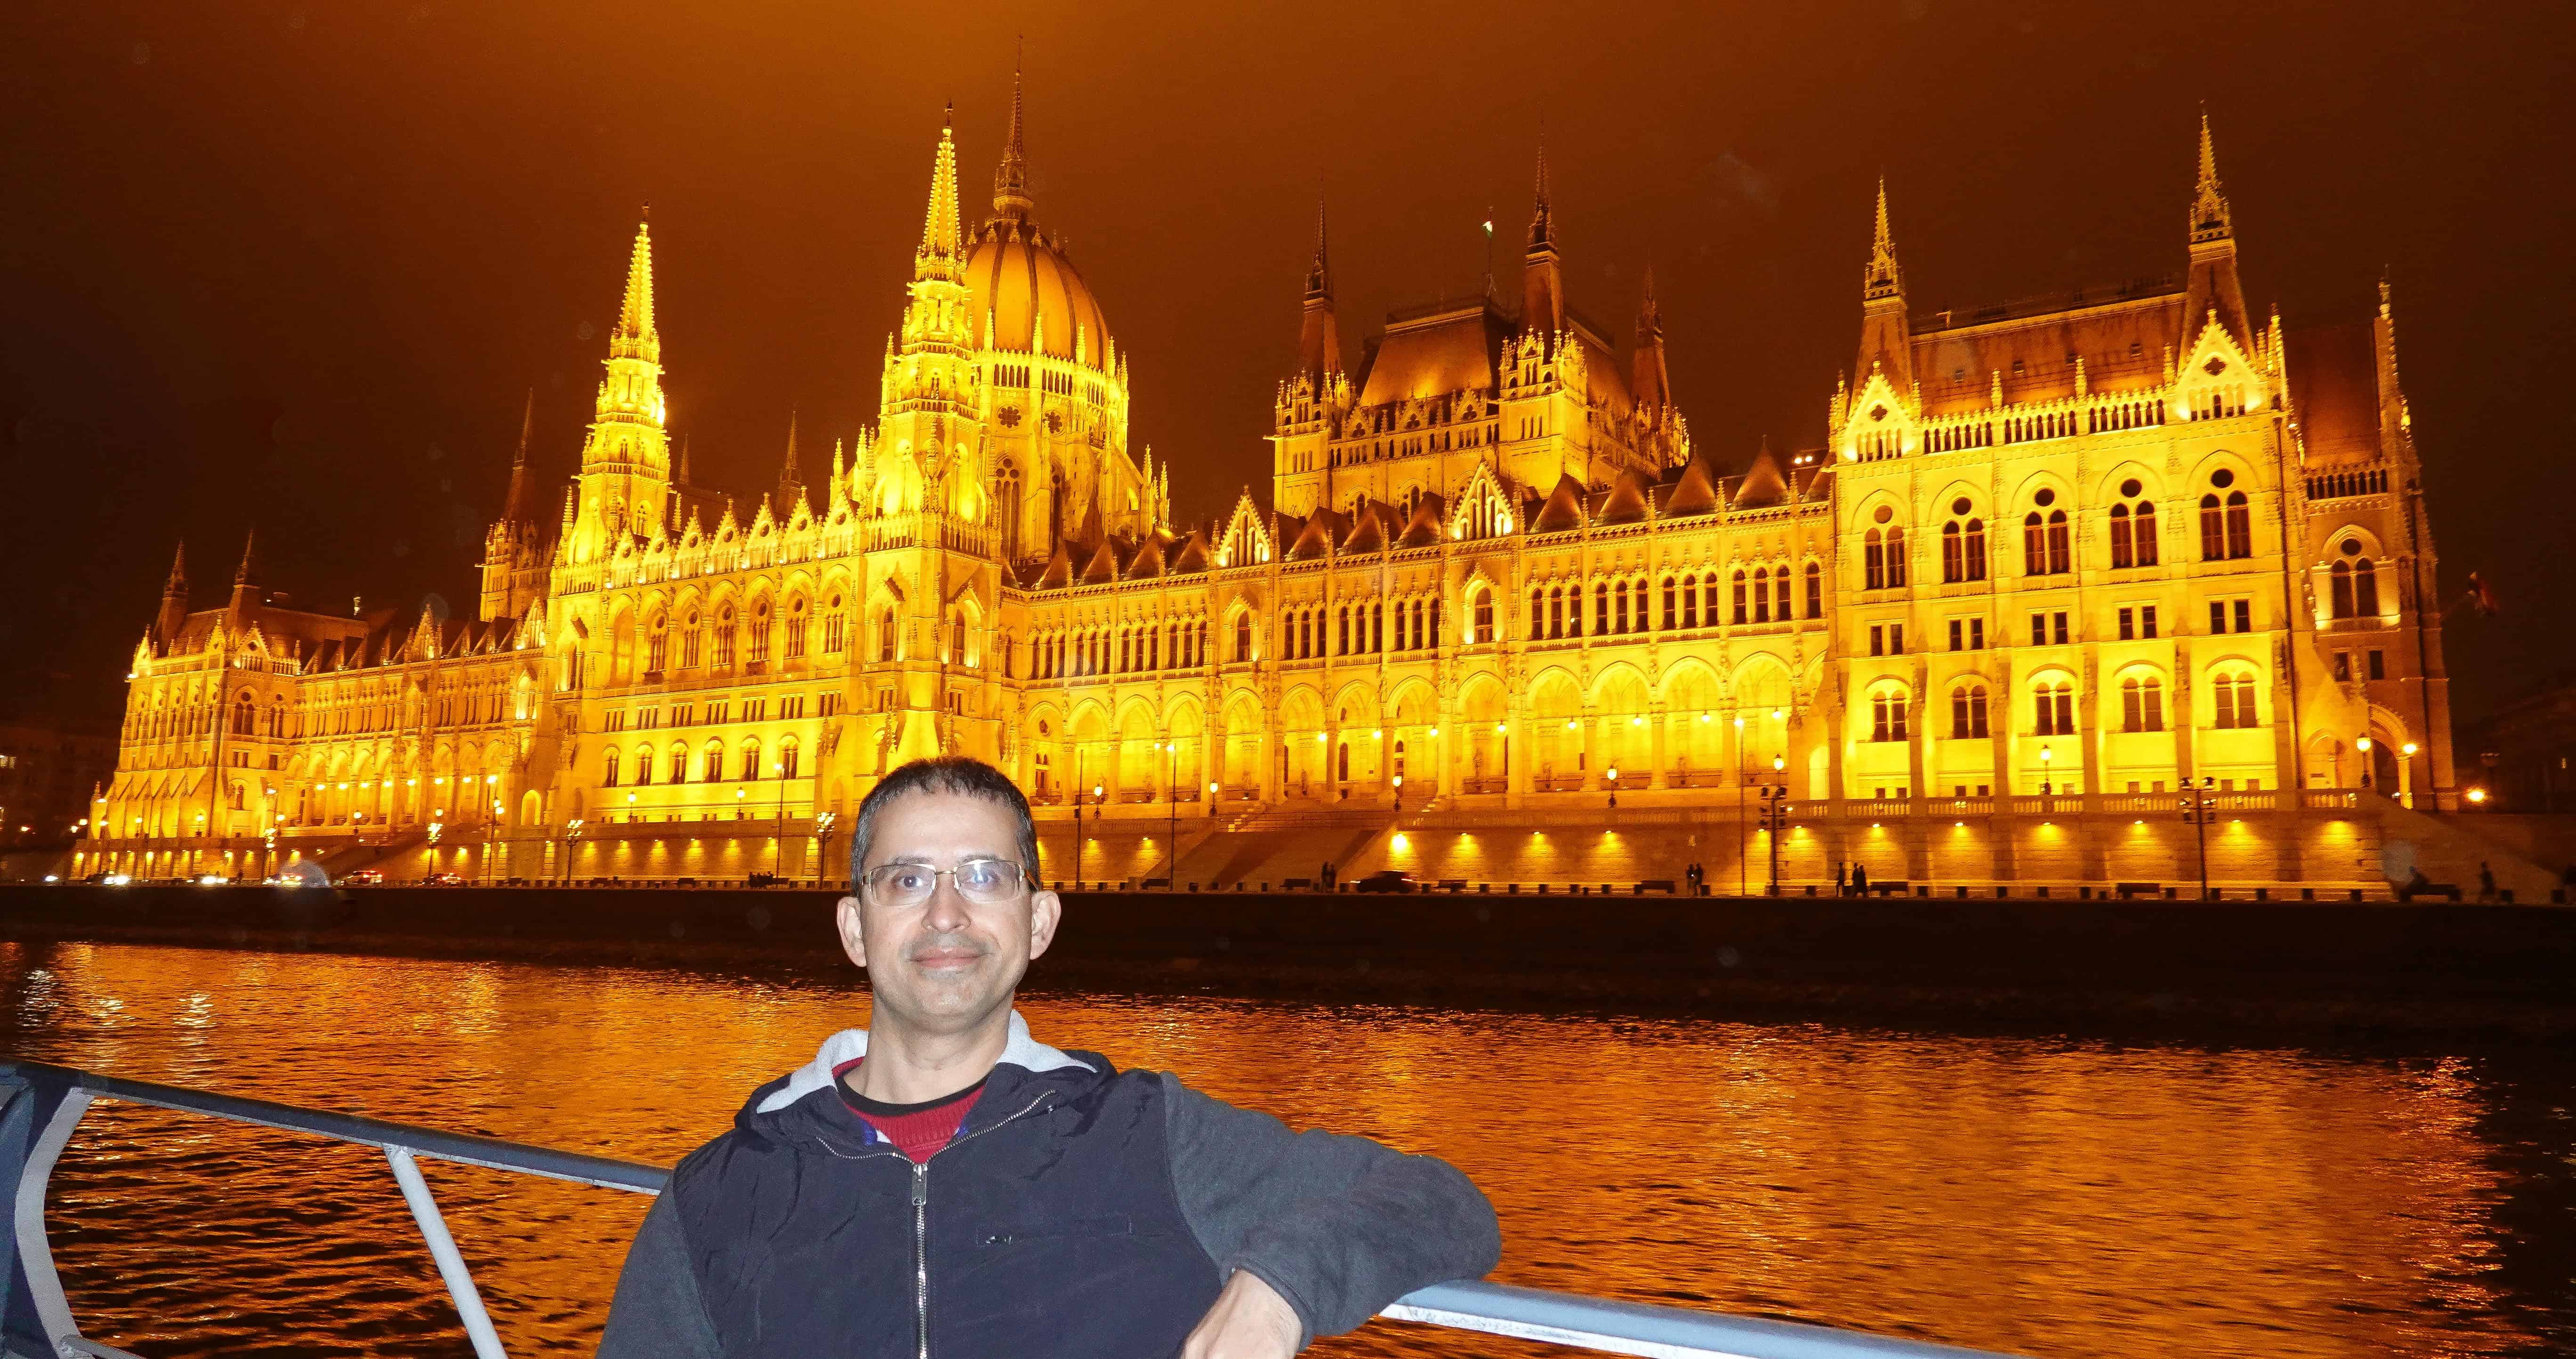 Hungarian Parliament building at night from Danube River